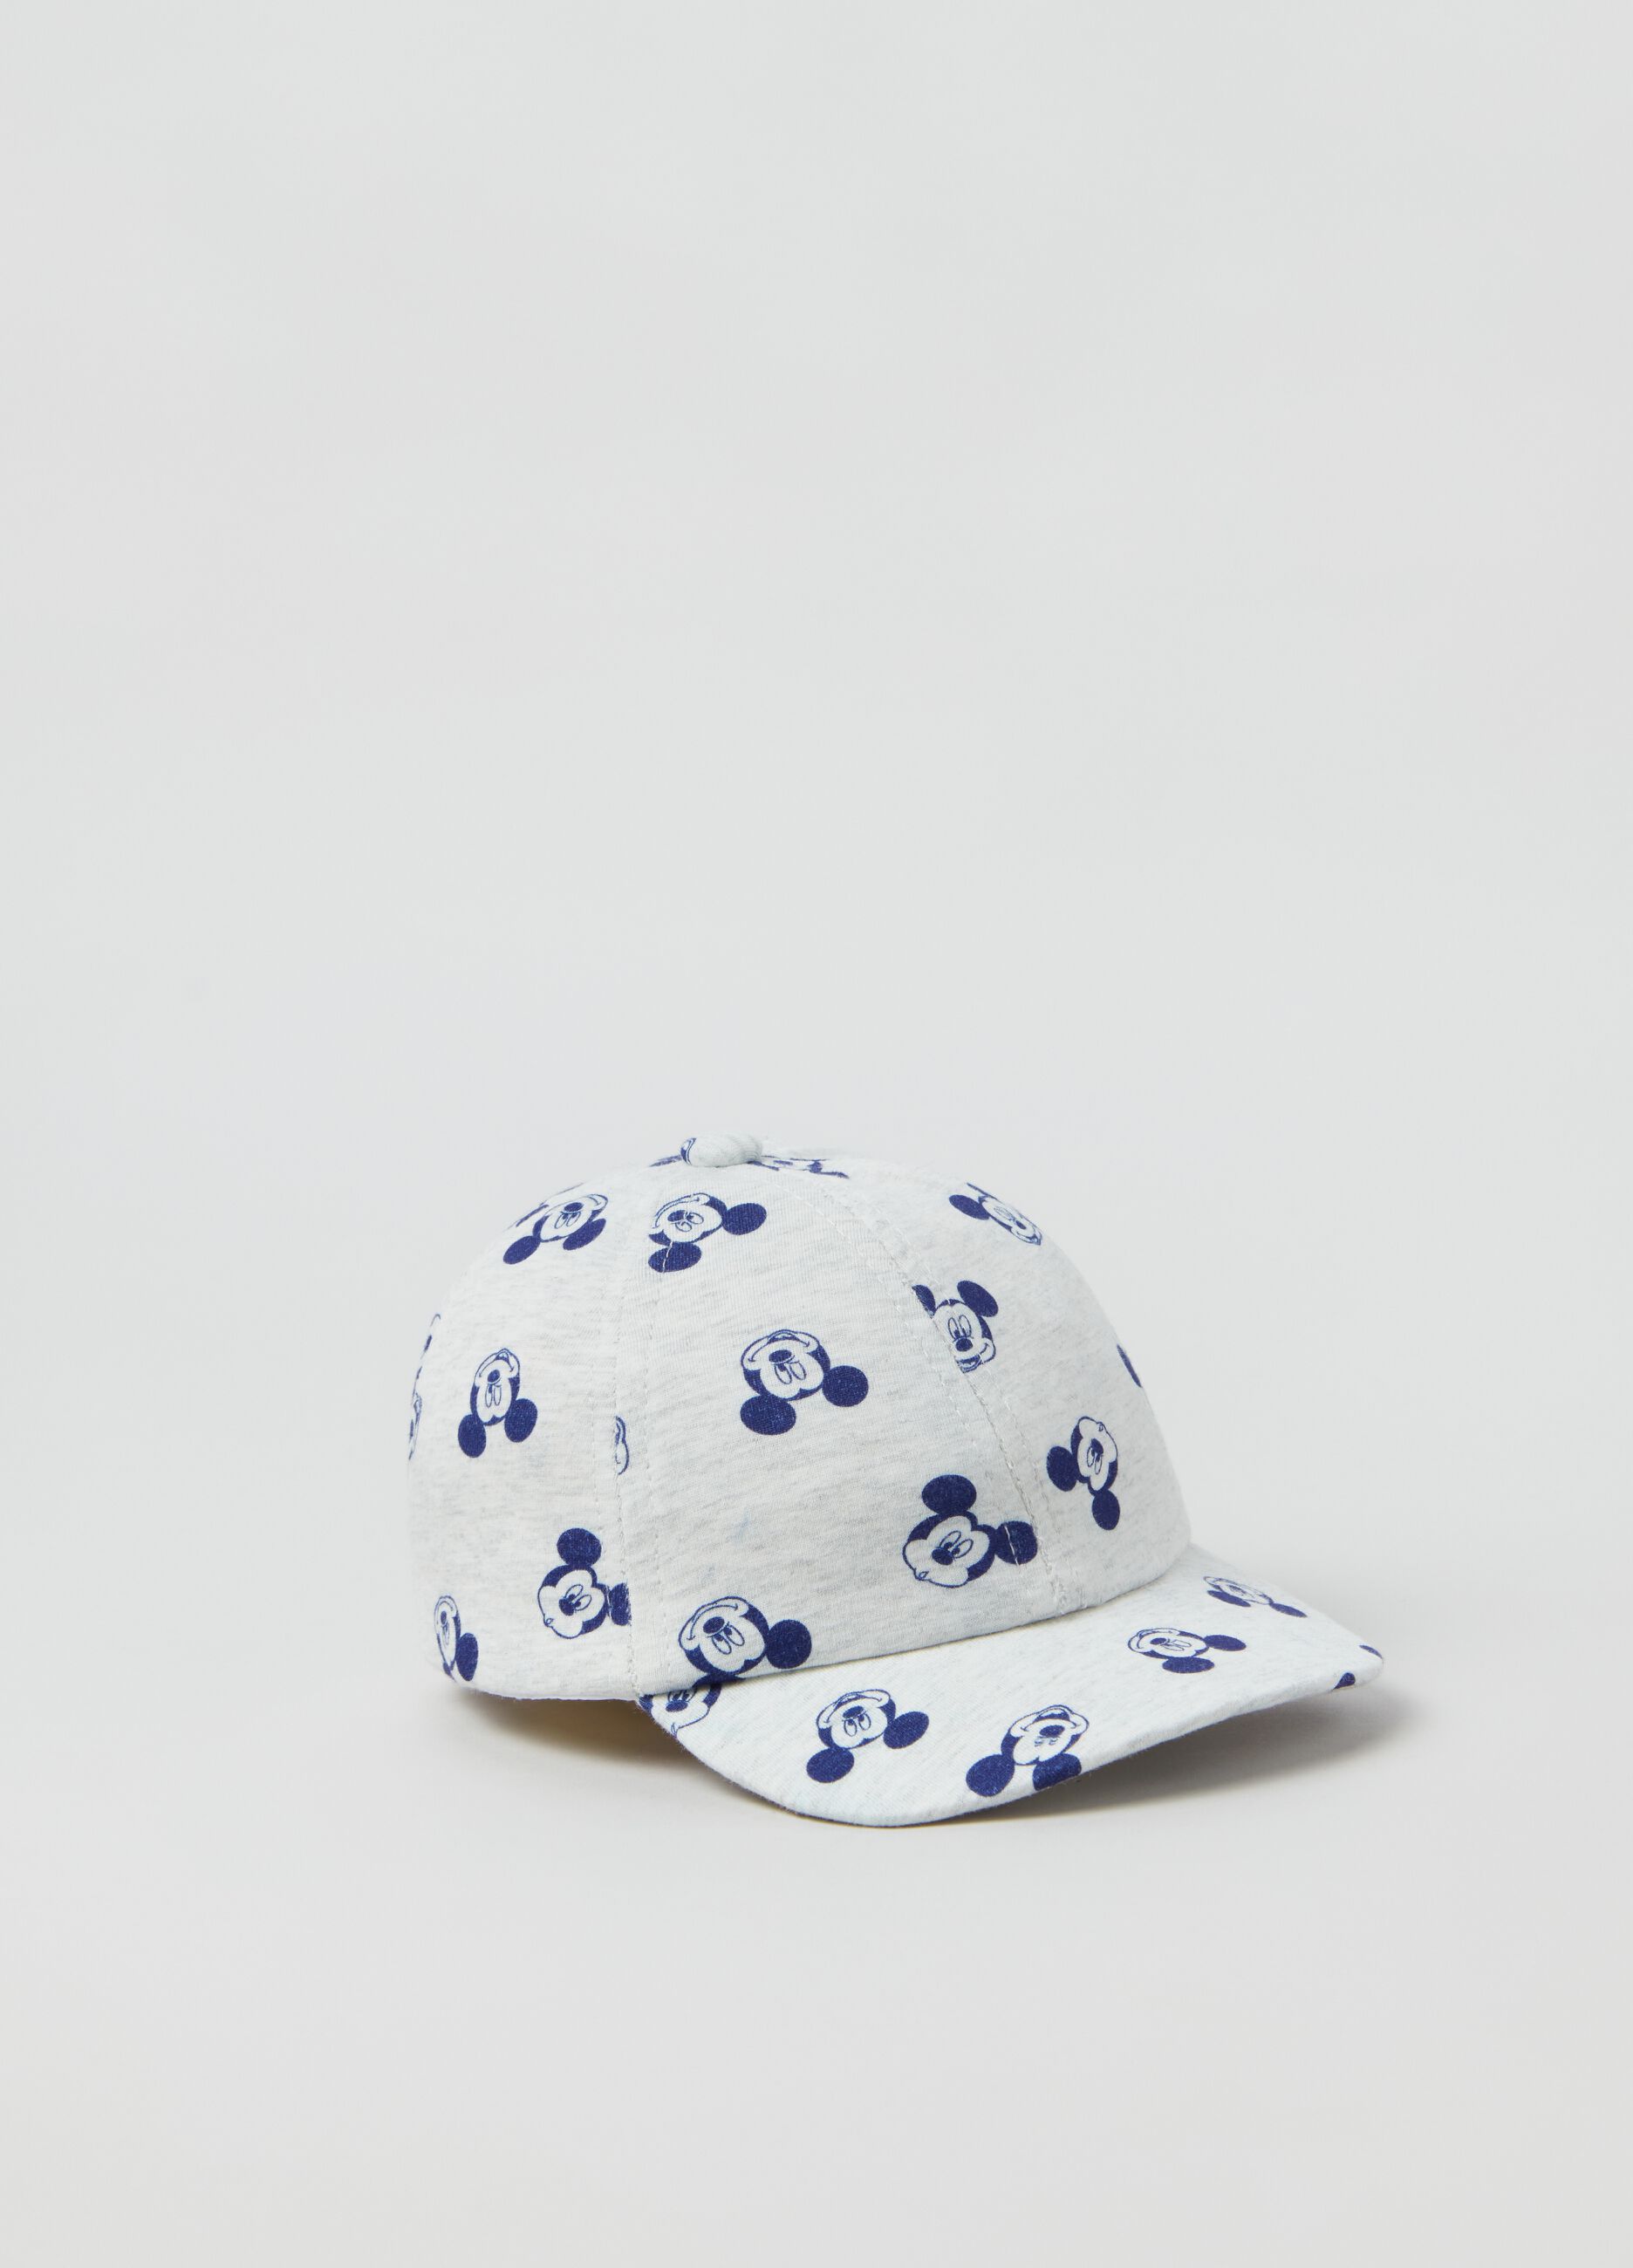 Baseball cap with Disney Baby Mickey Mouse print